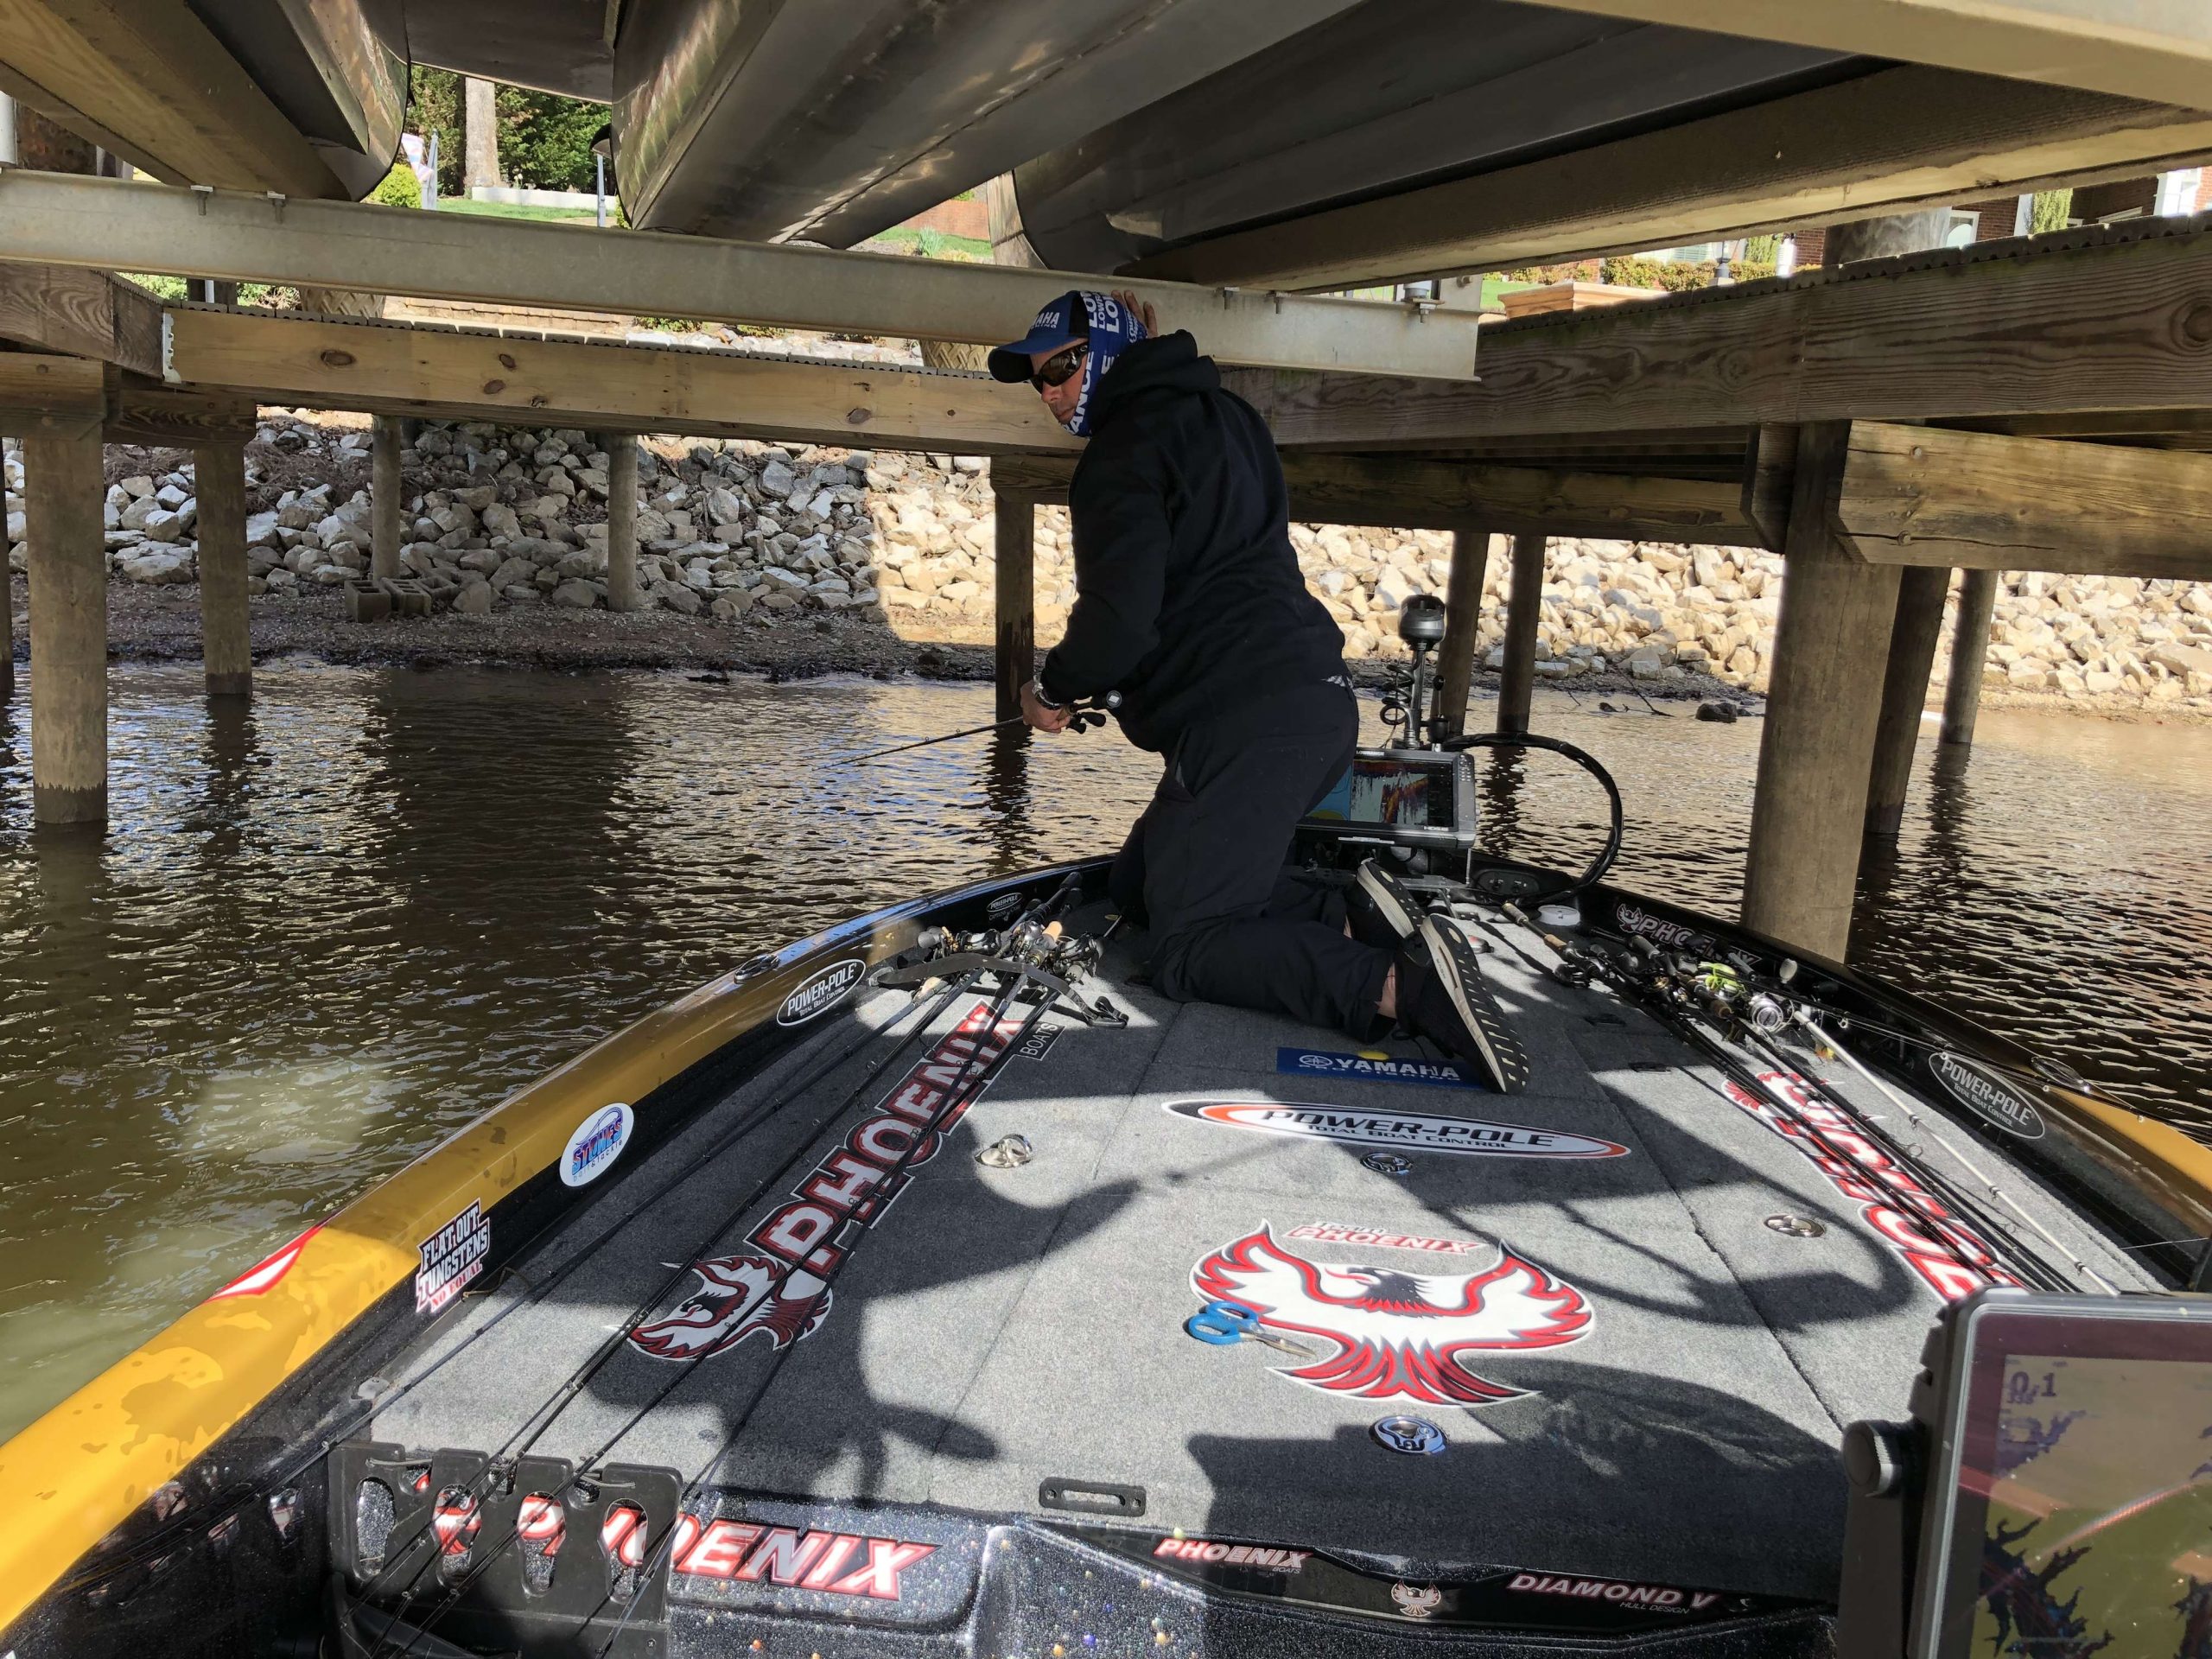 Bobby Lane is getting bites this morning, and has put no less than six short fish in the box.  Currently he has two keepers with hopes of culling both of them.  Once he retrieved his crank bait, he went ahead and hit all the angles under this dock.
